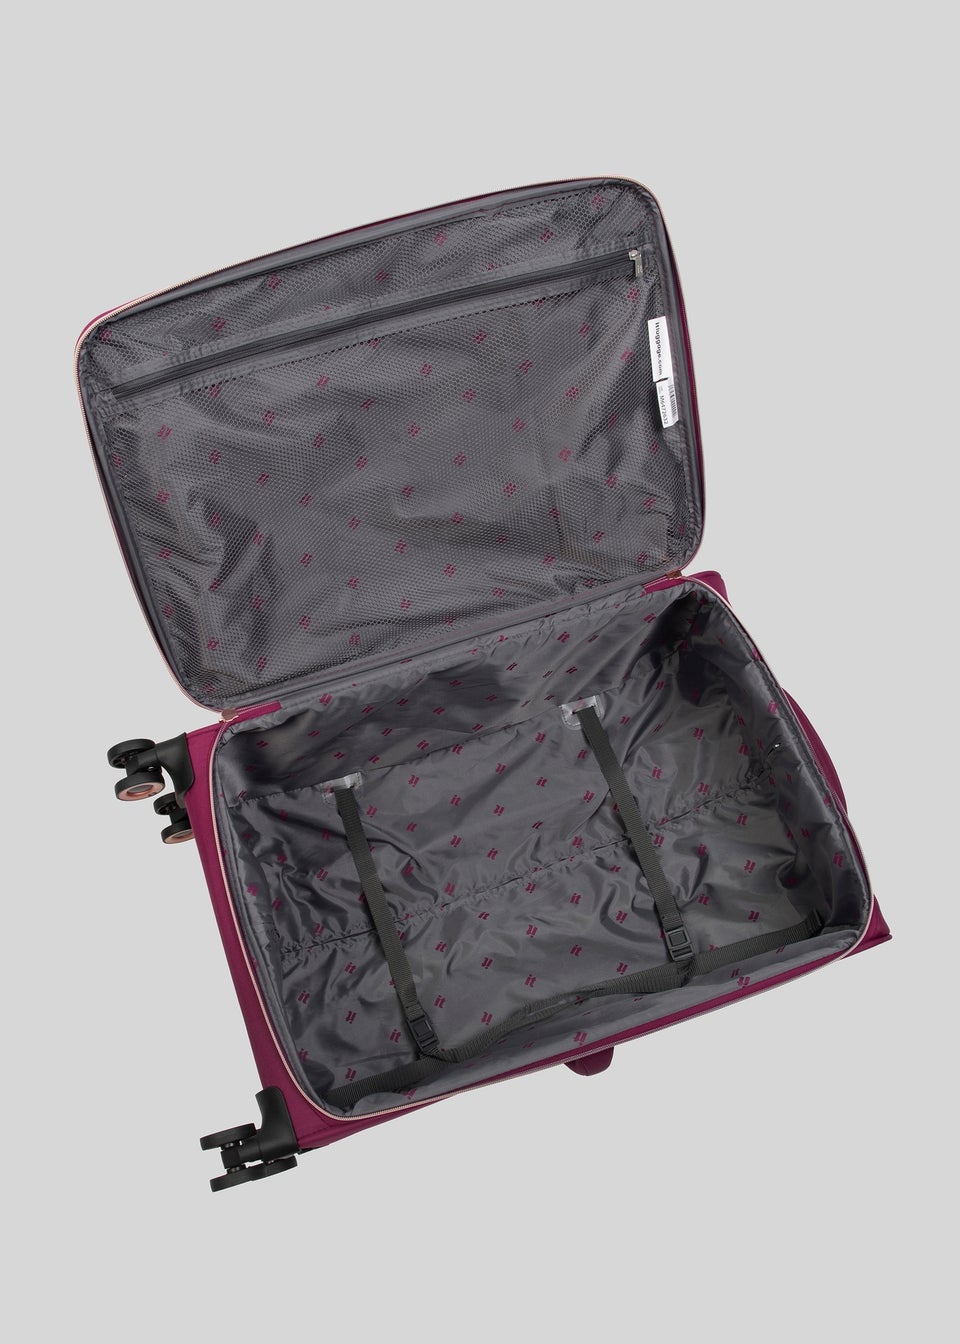 IT Luggage Enliven Berry Suitcase